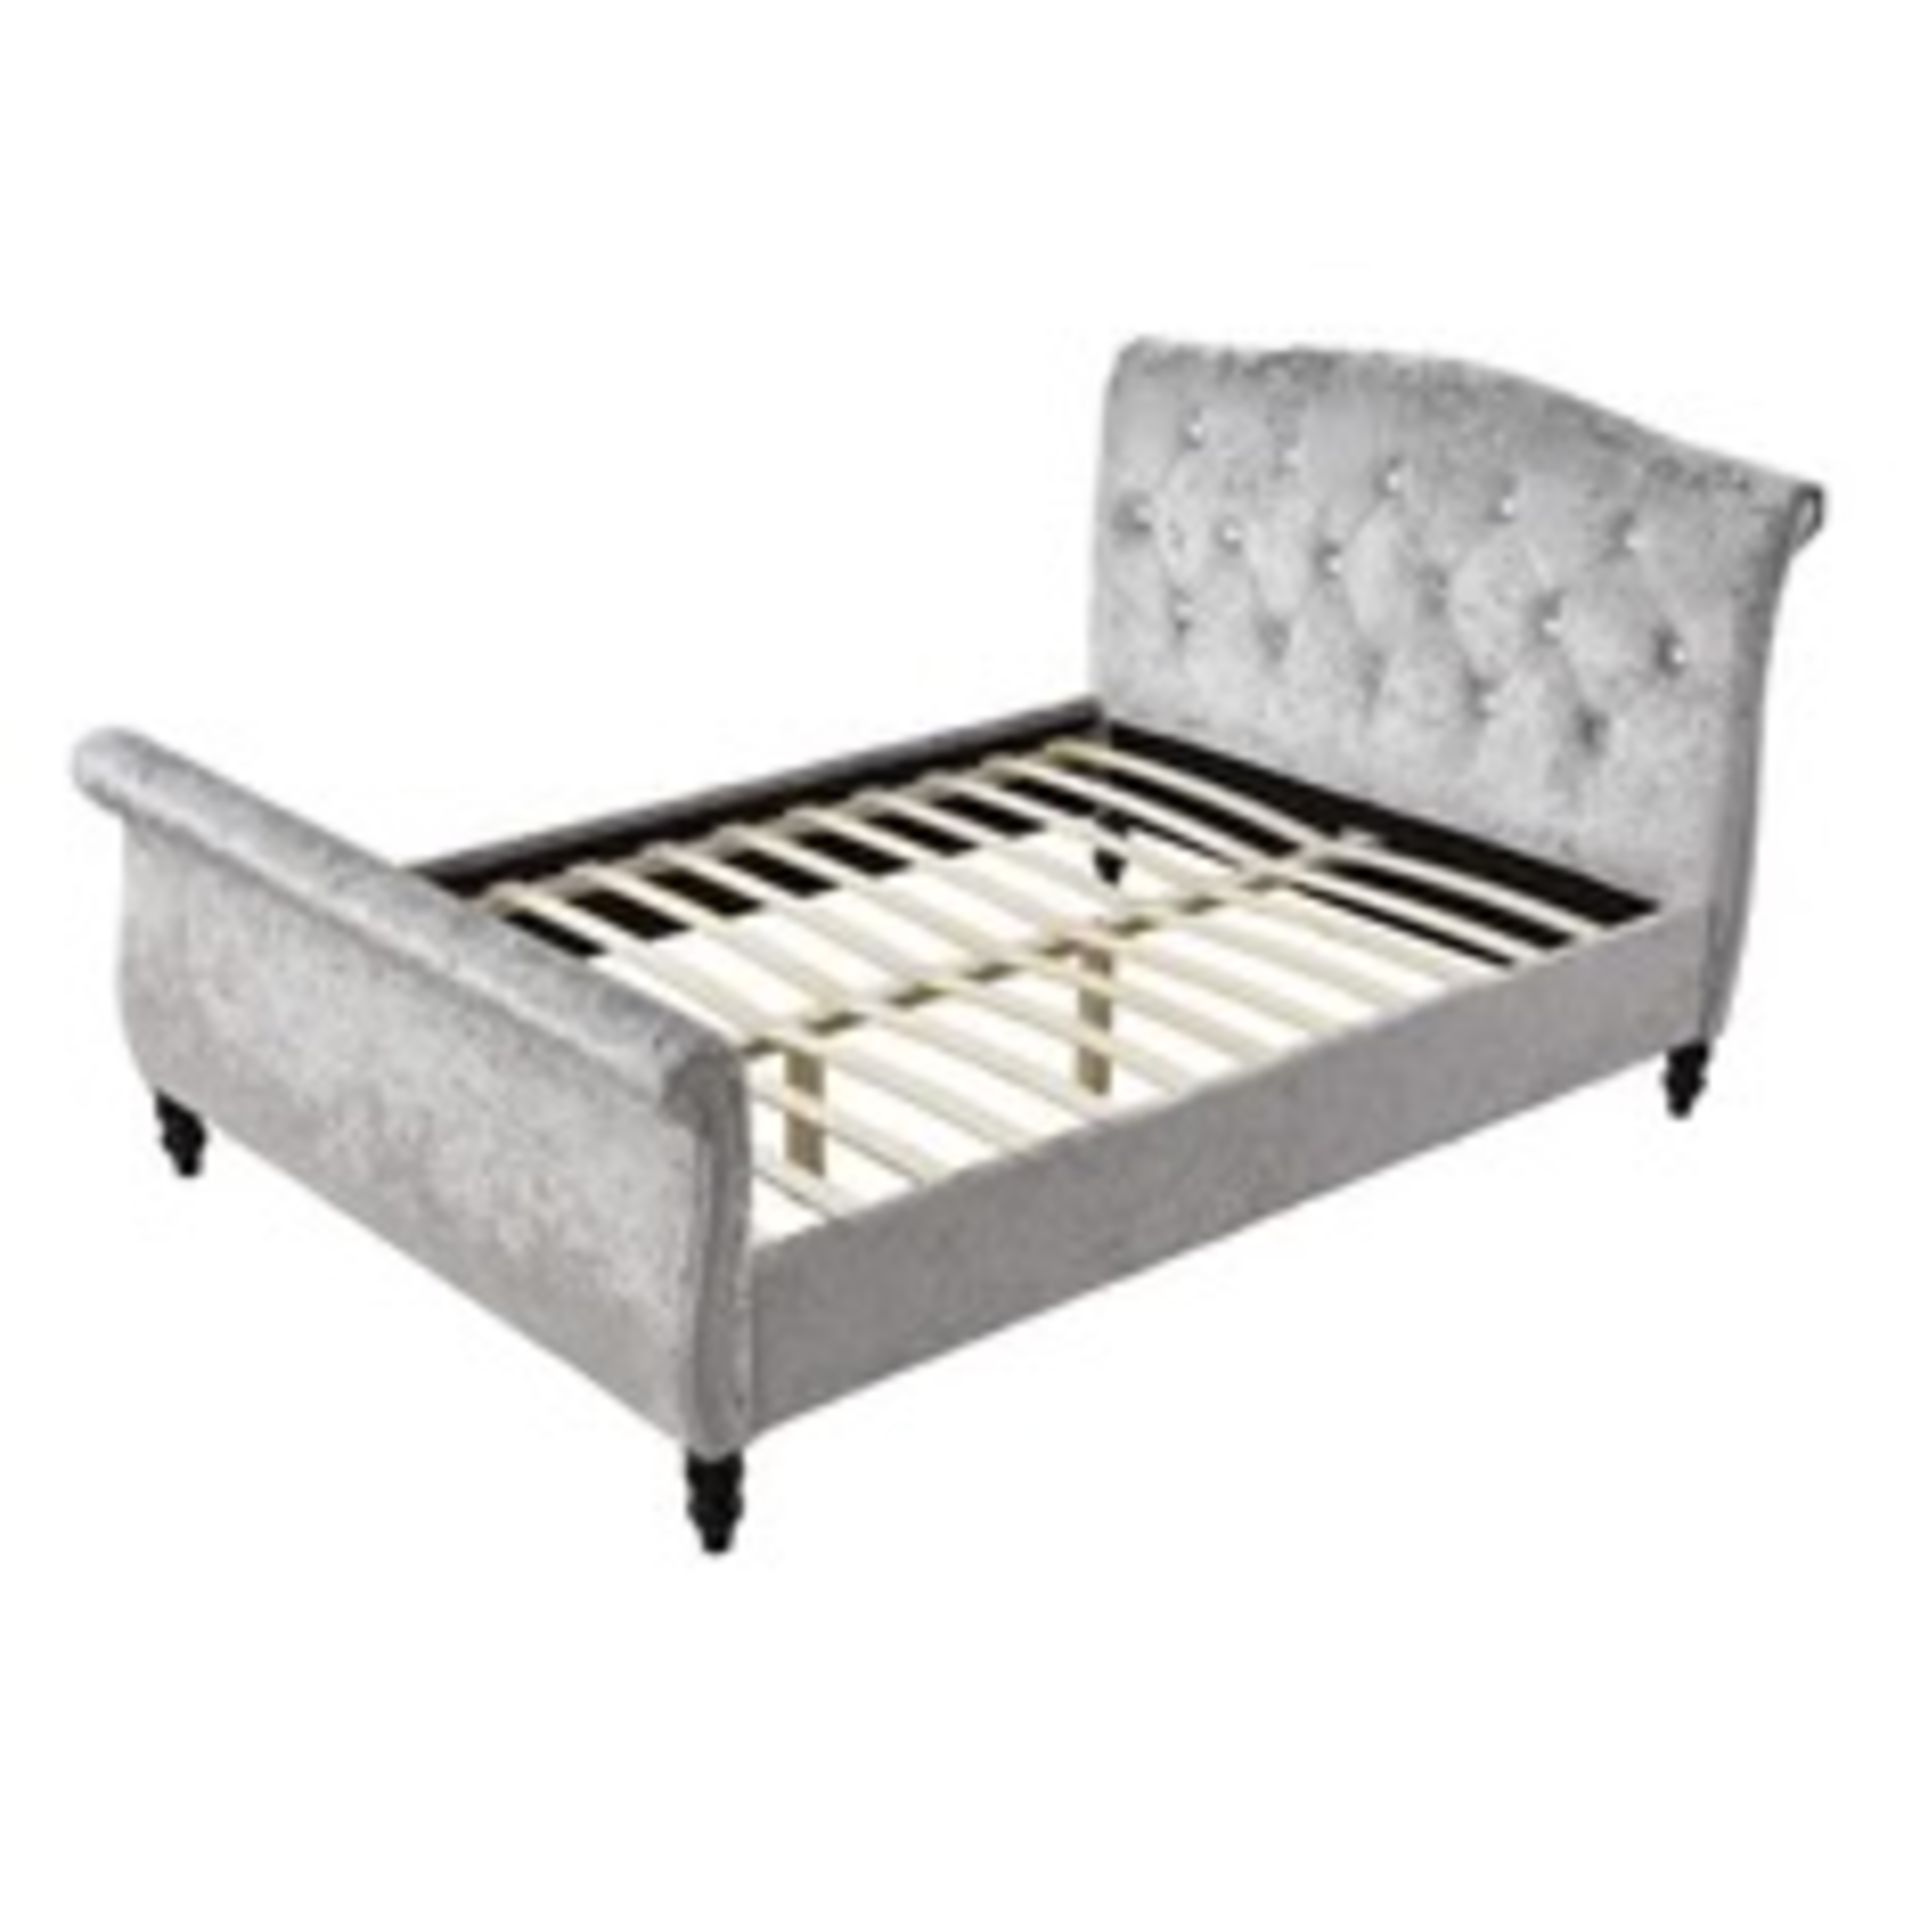 LOT CONTAINING 10 X MEISSA CRUSHED VELVET UPHOLSTERED SLEIGH BED WITH DIAMANTE HEADBOARD, SILVER - Image 2 of 3